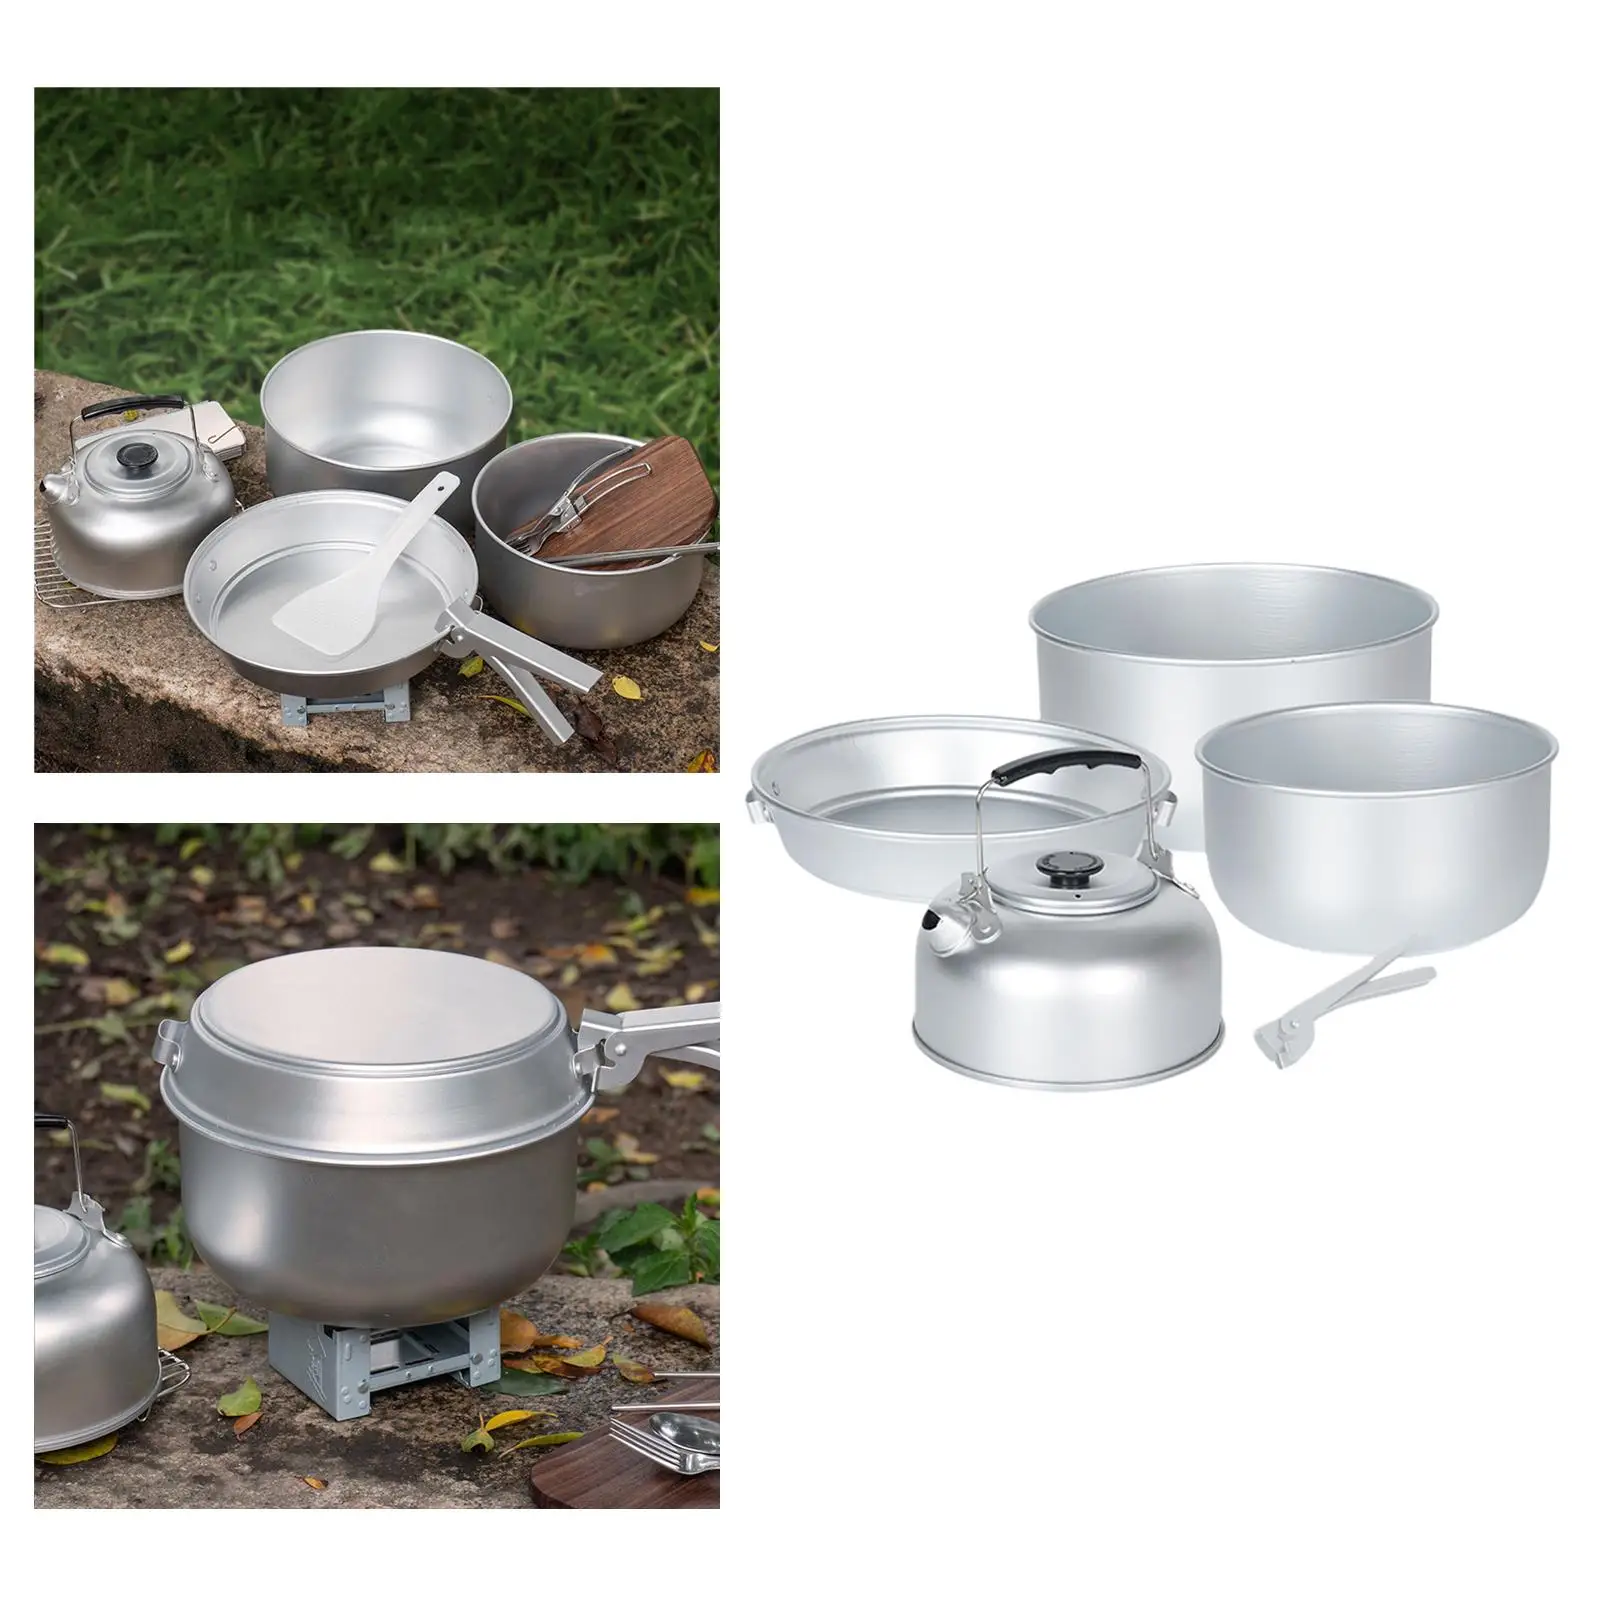 Lightweight Camping Cookware Set Wth Handle Cook Set Pan Aluminum Utensils Cooker for Outdoor Picnic Backpacking Campfire BBQ